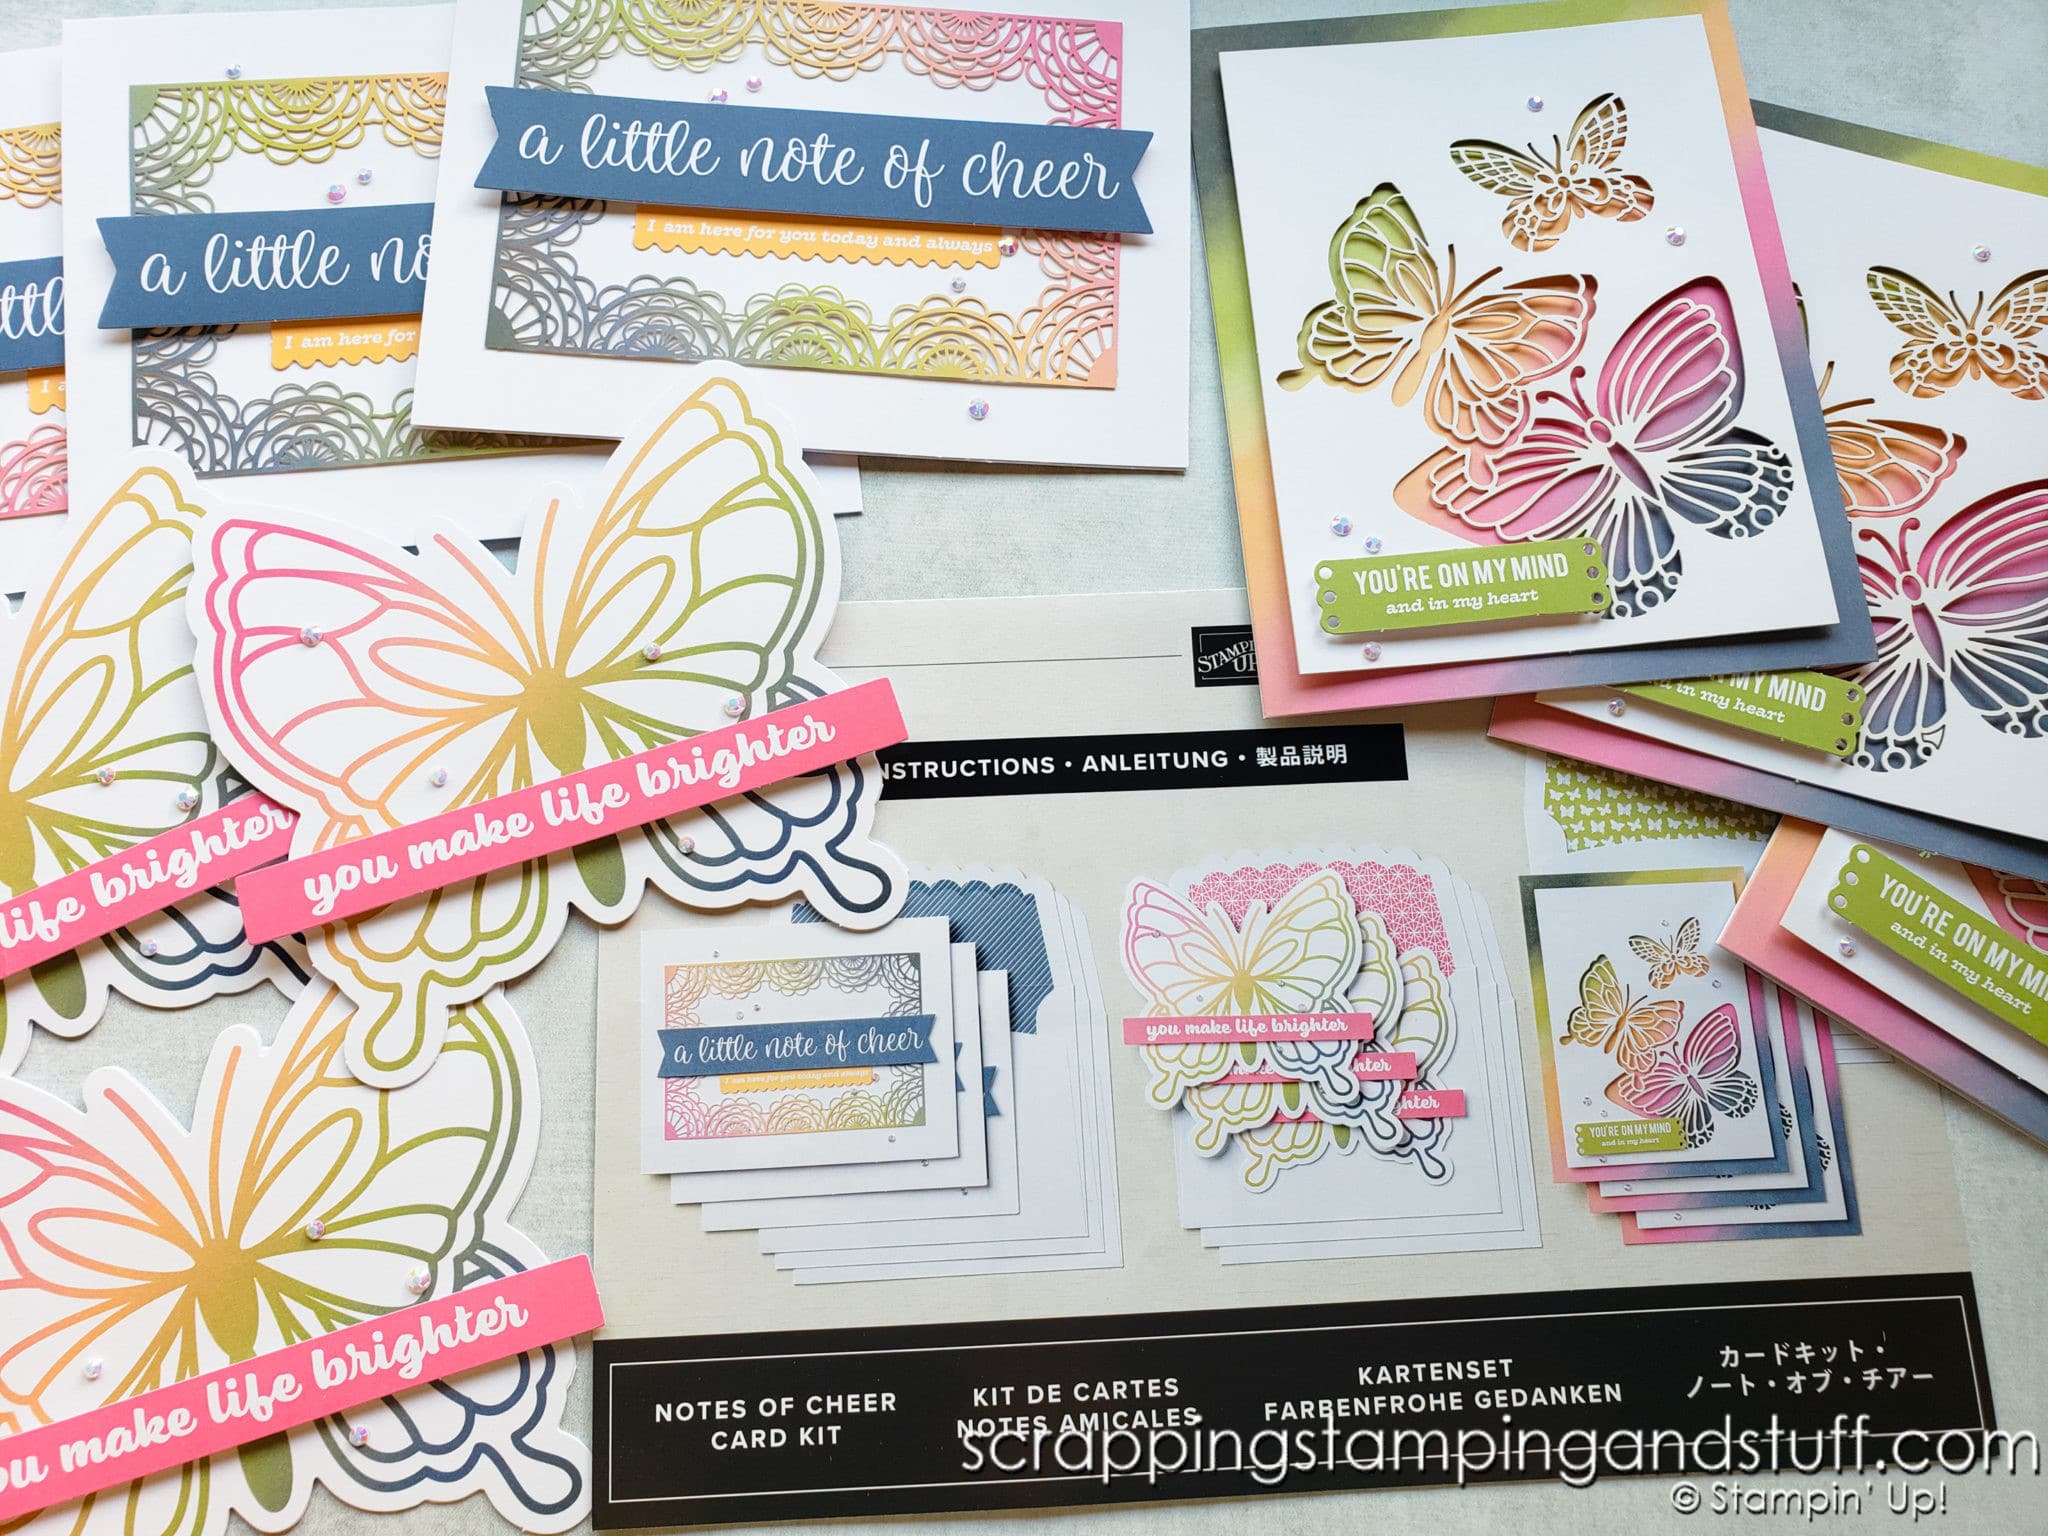 Stampin Up Card Kits – Beautiful Cards Made Easy!